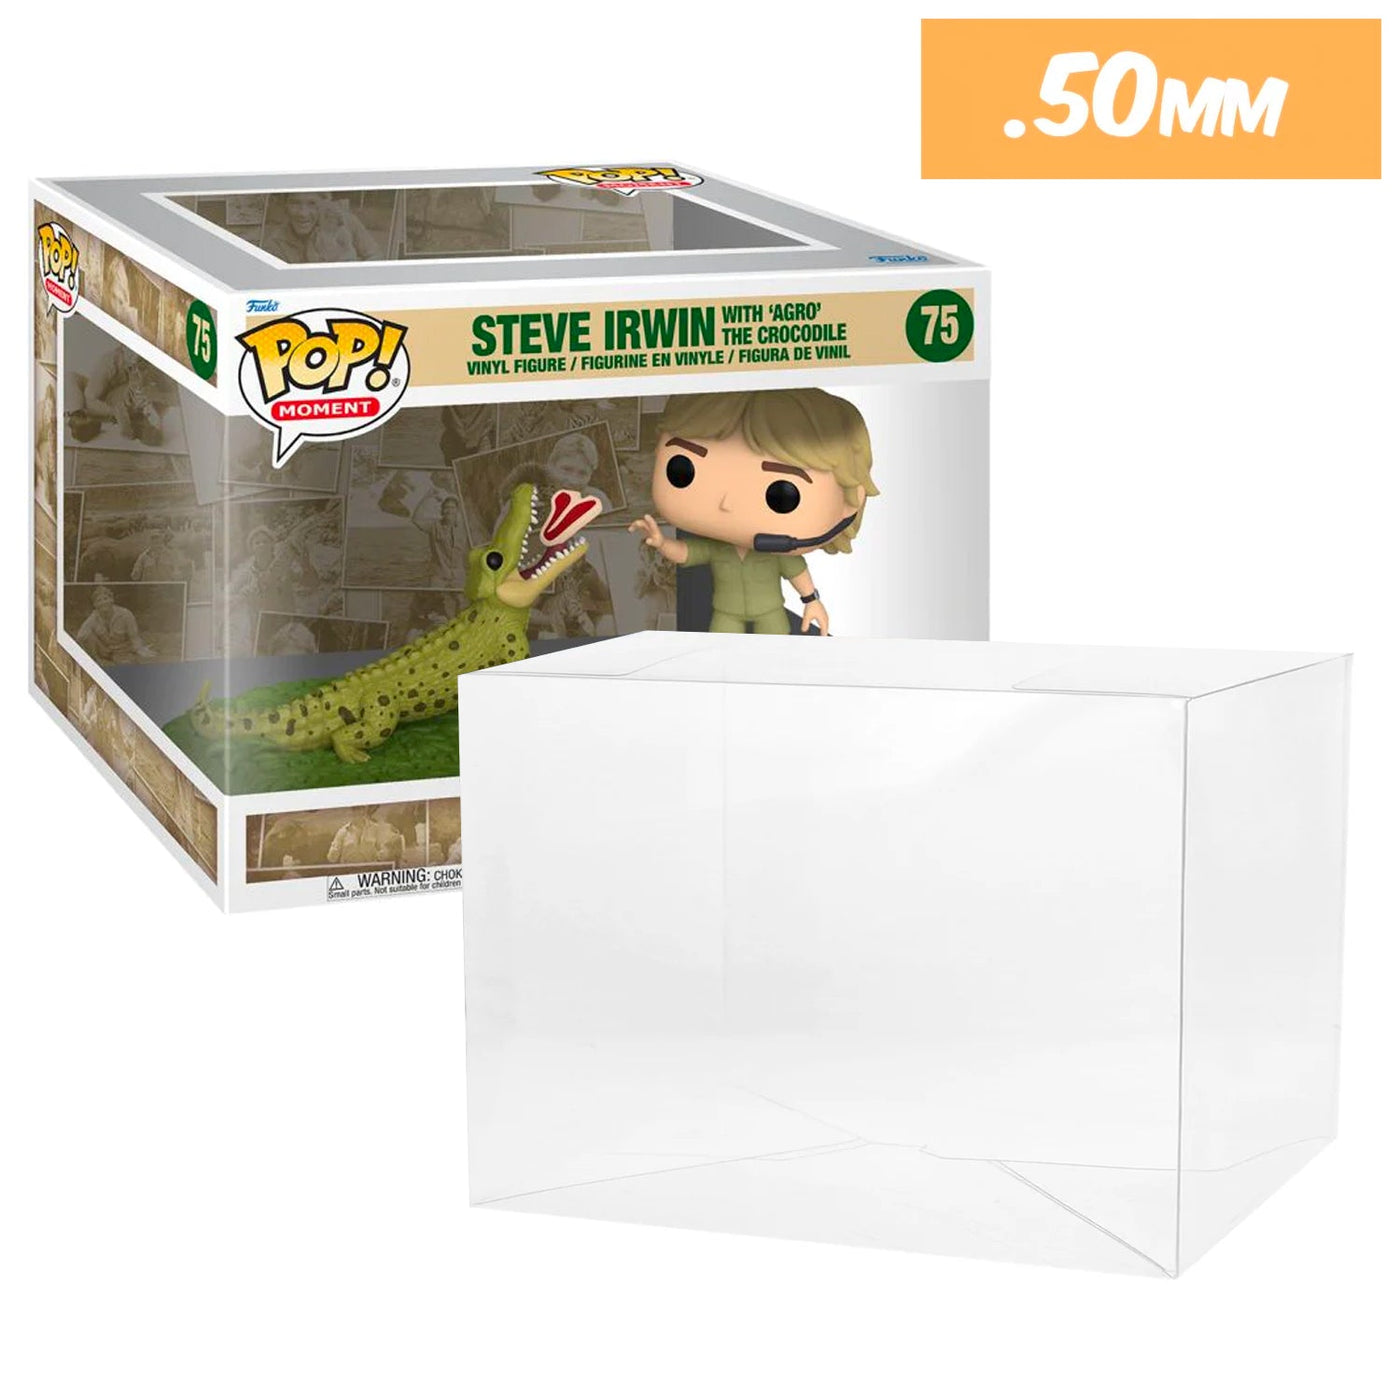 Funko POP! Moment Steve Irwin with Agro the Crocodile #75 Pop Protector Size CONFIRMED!